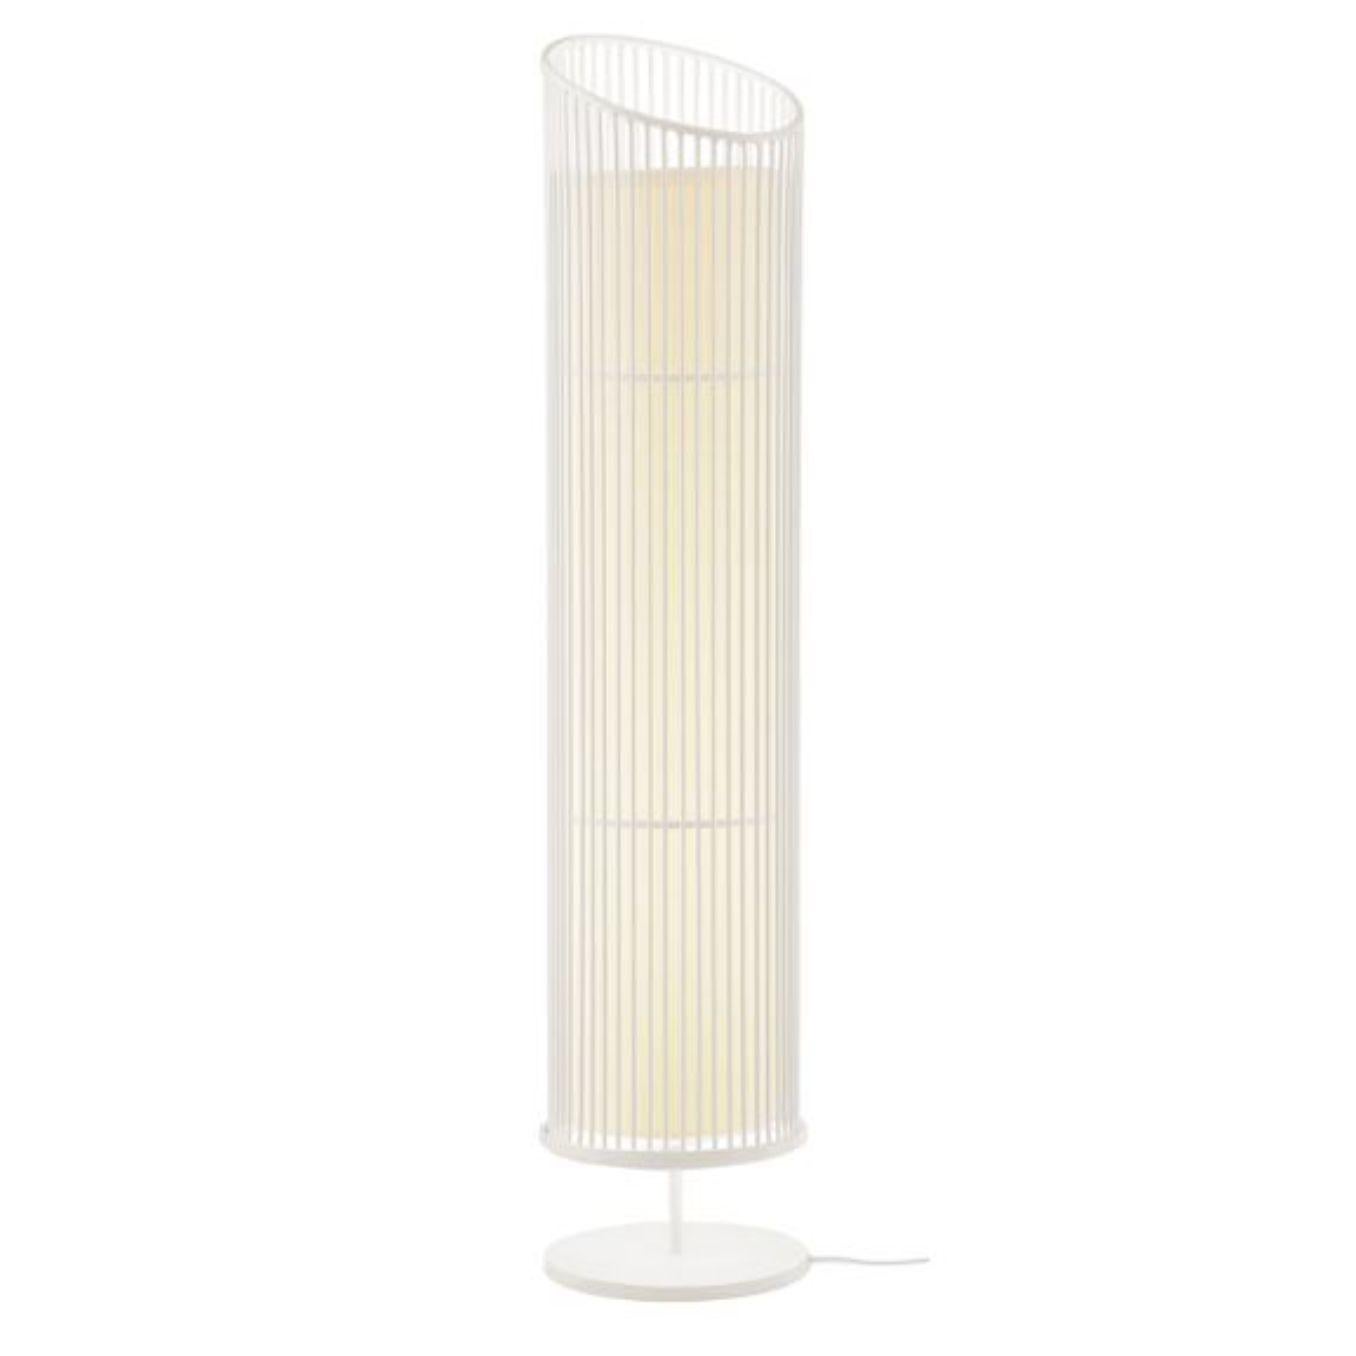 Ivory new spider floor lamp by Dooq.
Dimensions: W 30 x D 30 x H 140 cm.
Materials: lacquered metal, polished or brushed metal.
abat-jour: cotton
Also available in different colors and materials. 

Information:
230V/50Hz
E27/2x20W